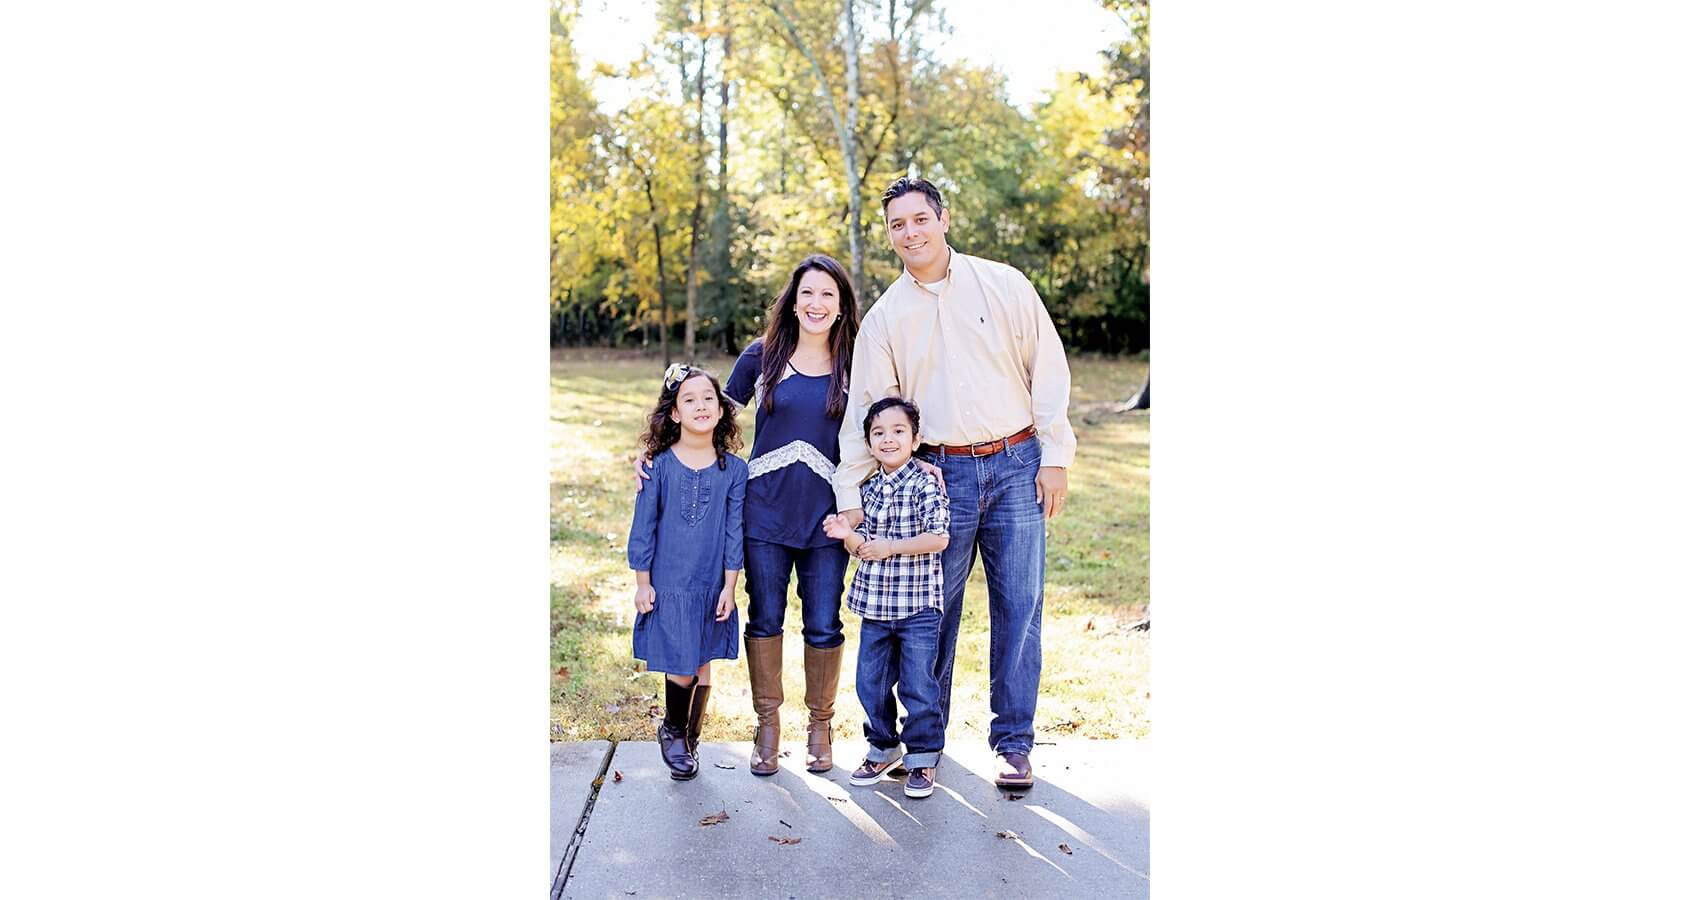 Ruth Ann Luna, Ph.D., is pictured with her family. She hopes results from this study will benefit patients like her son, a six-year-old with autism who has limited verbal abilities and also suffers from GI problems. (Credit: Lindsay Moore)